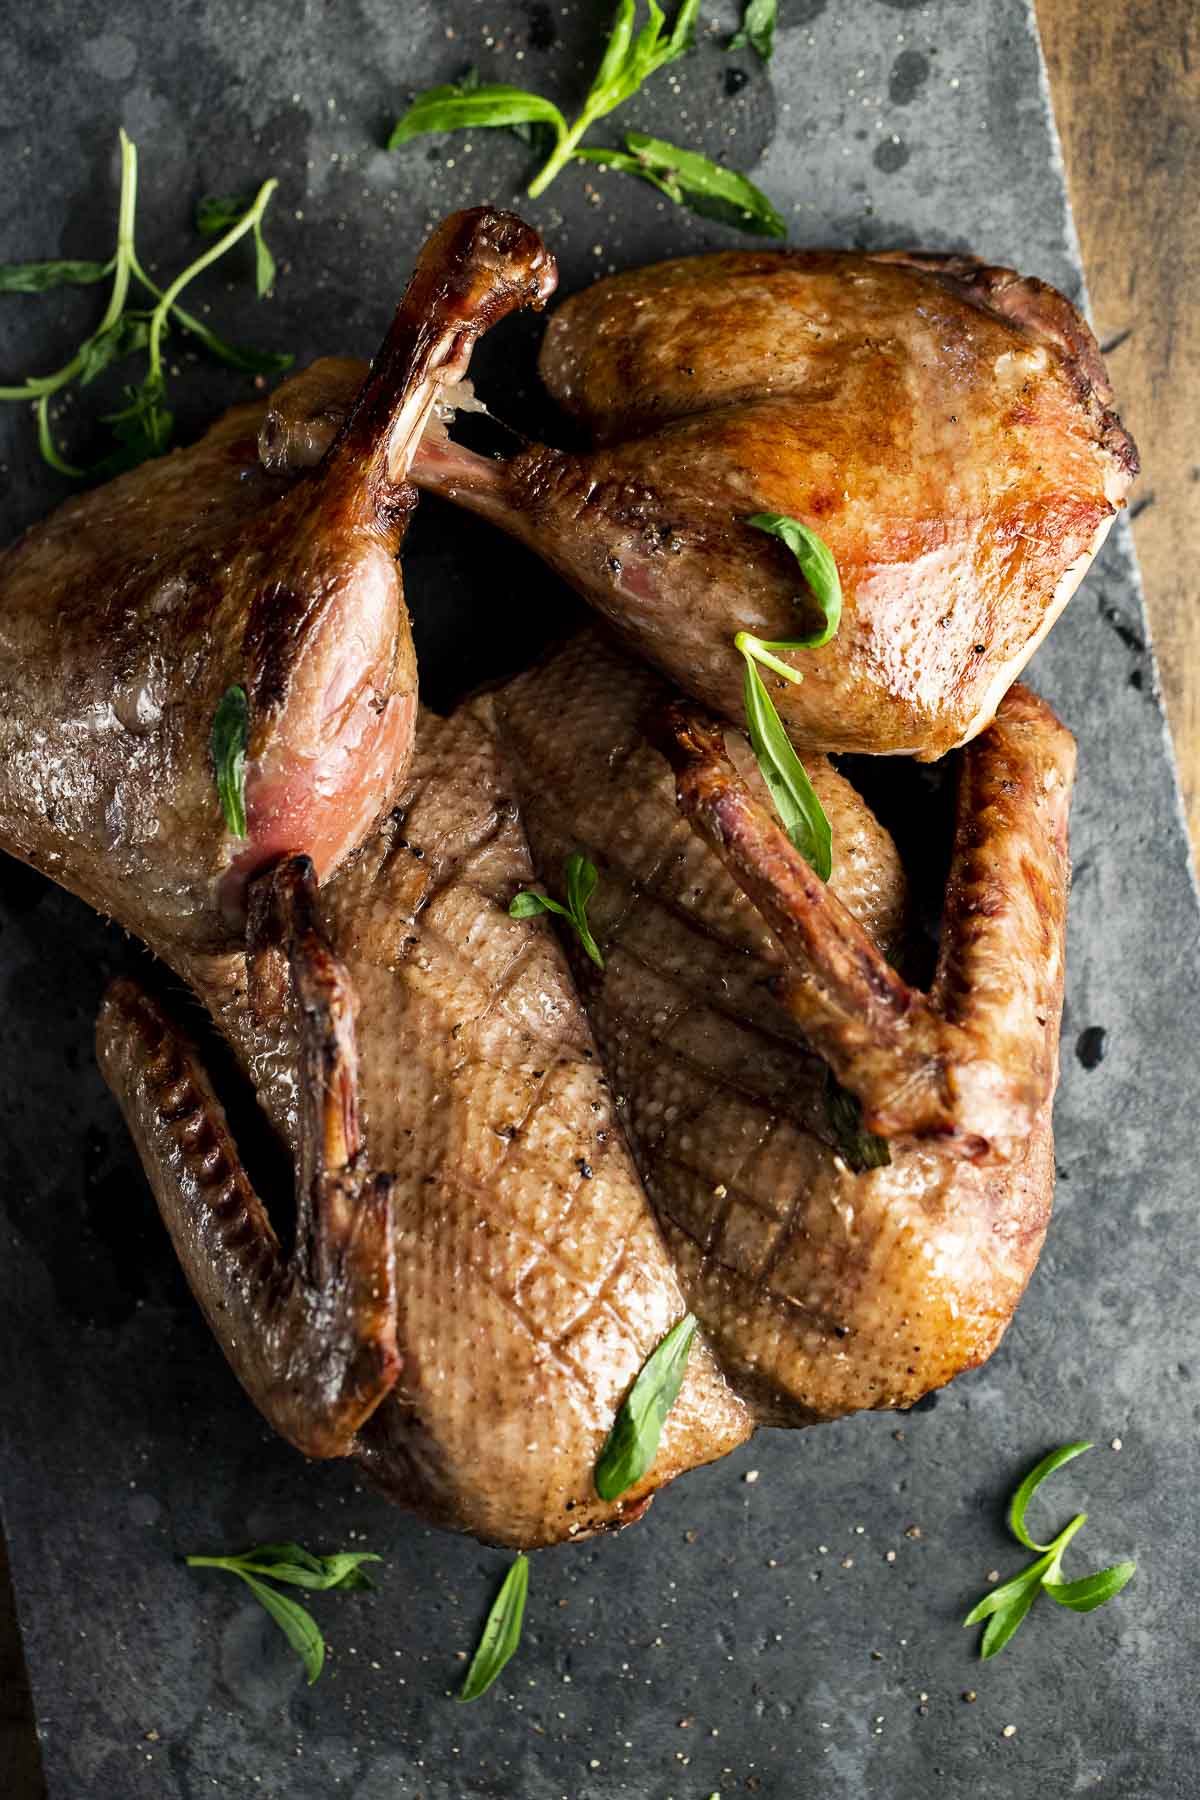 https://www.wenthere8this.com/wp-content/uploads/2021/12/sous-vide-whole-duck-3.jpg